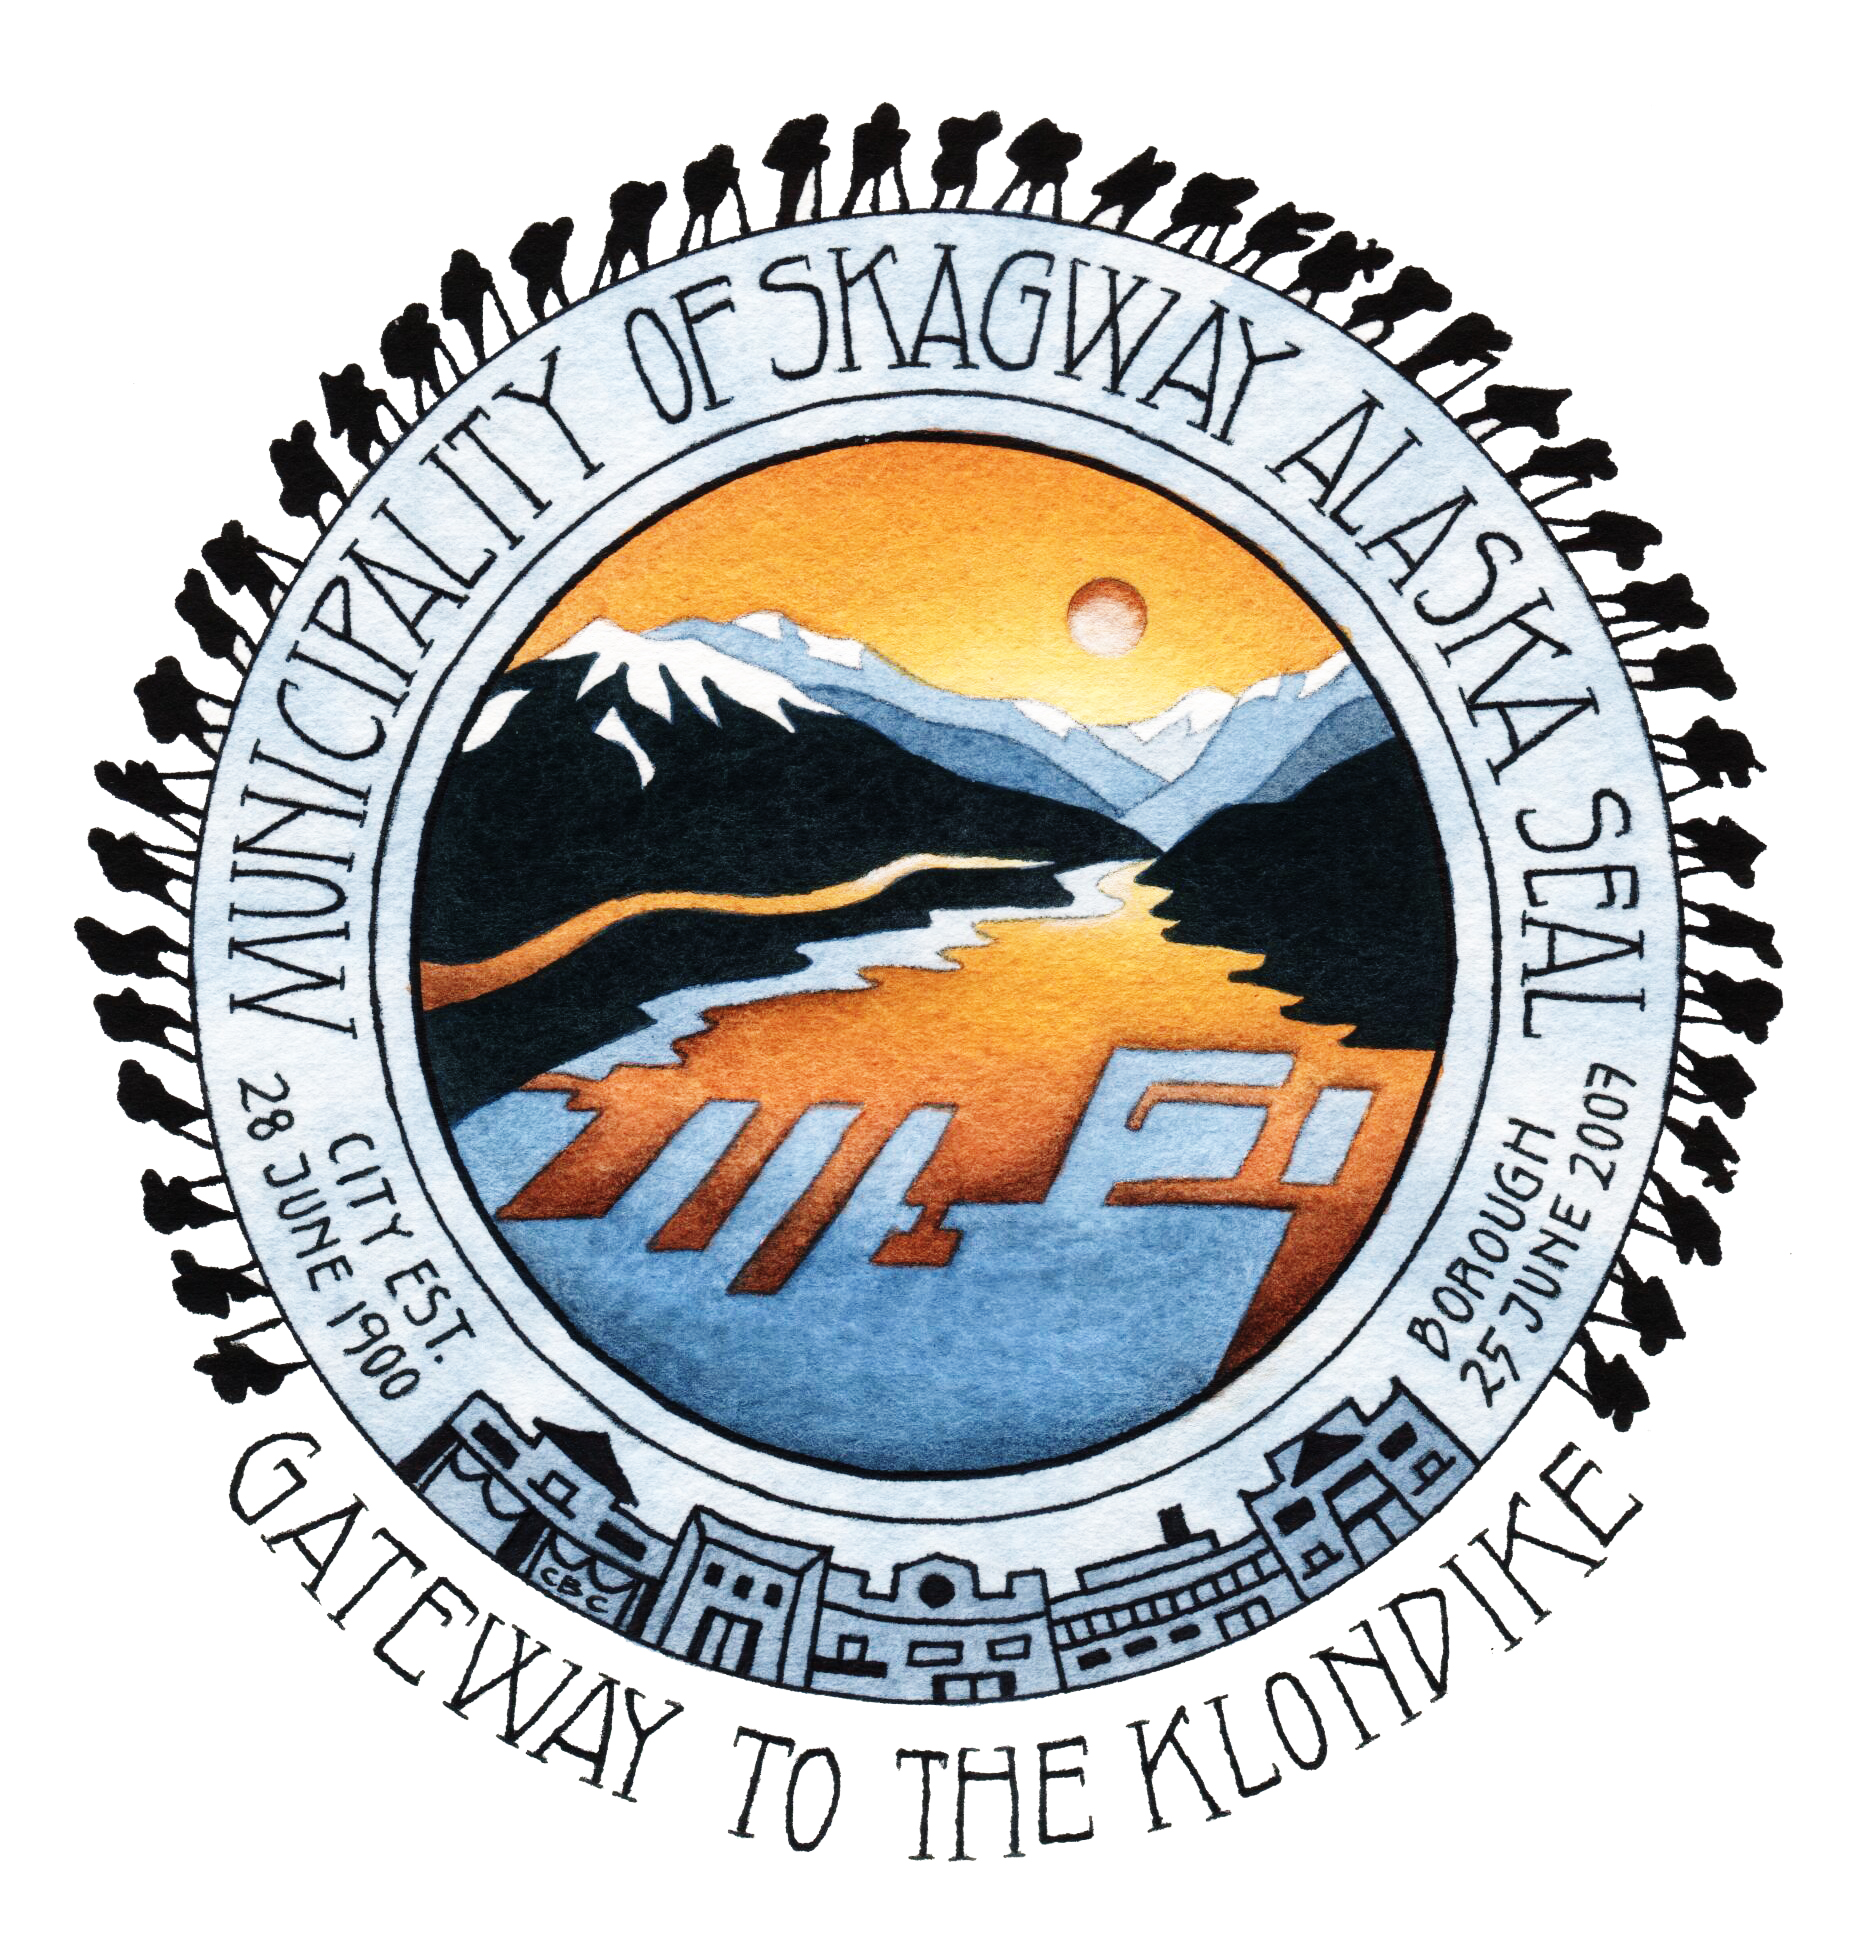 This is an image of the seal of Municipality of Skagway Borough